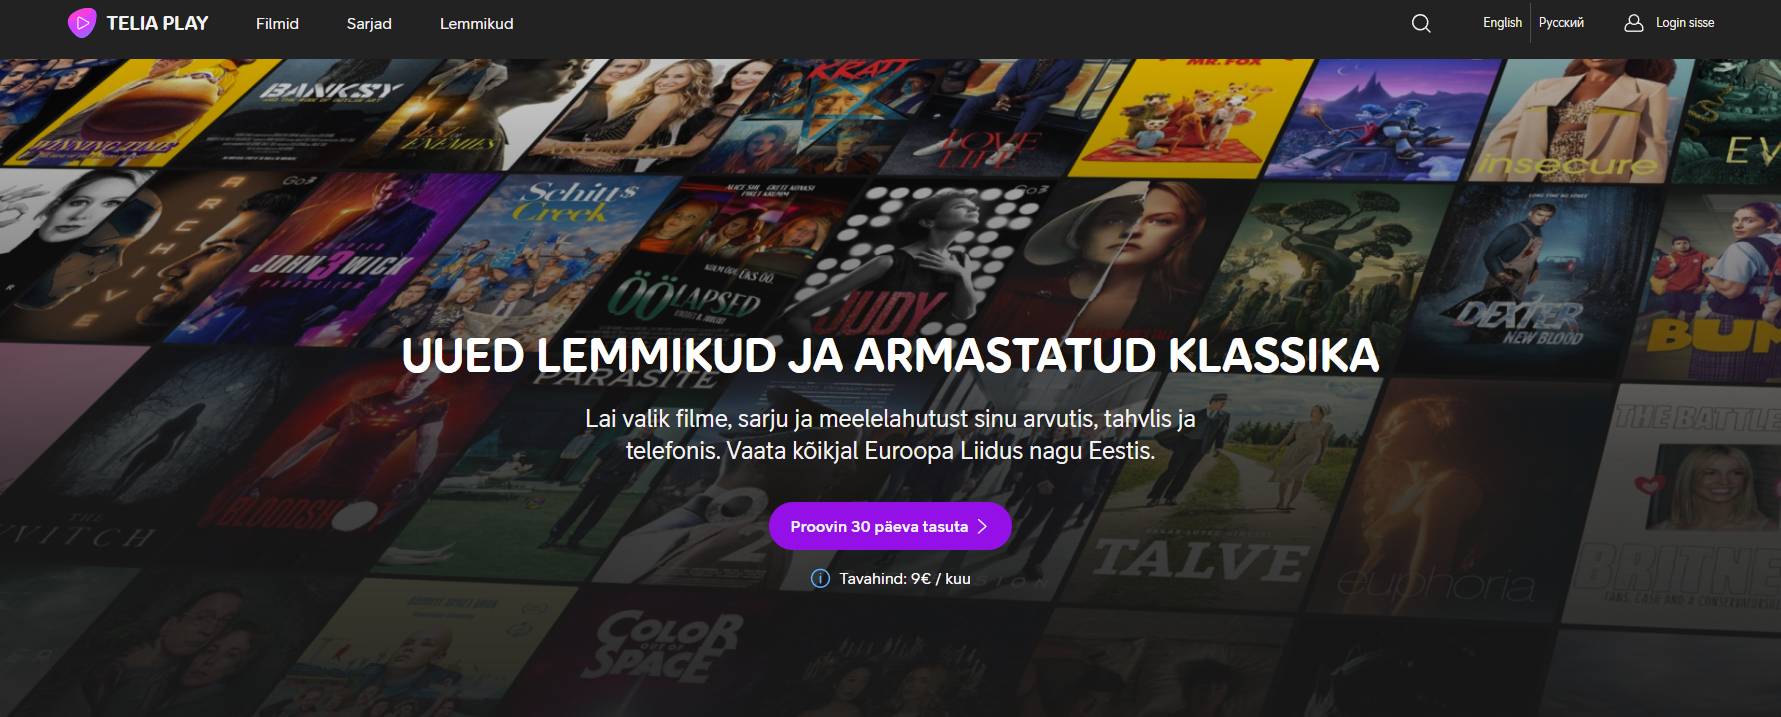 Telia launched a new streaming service |